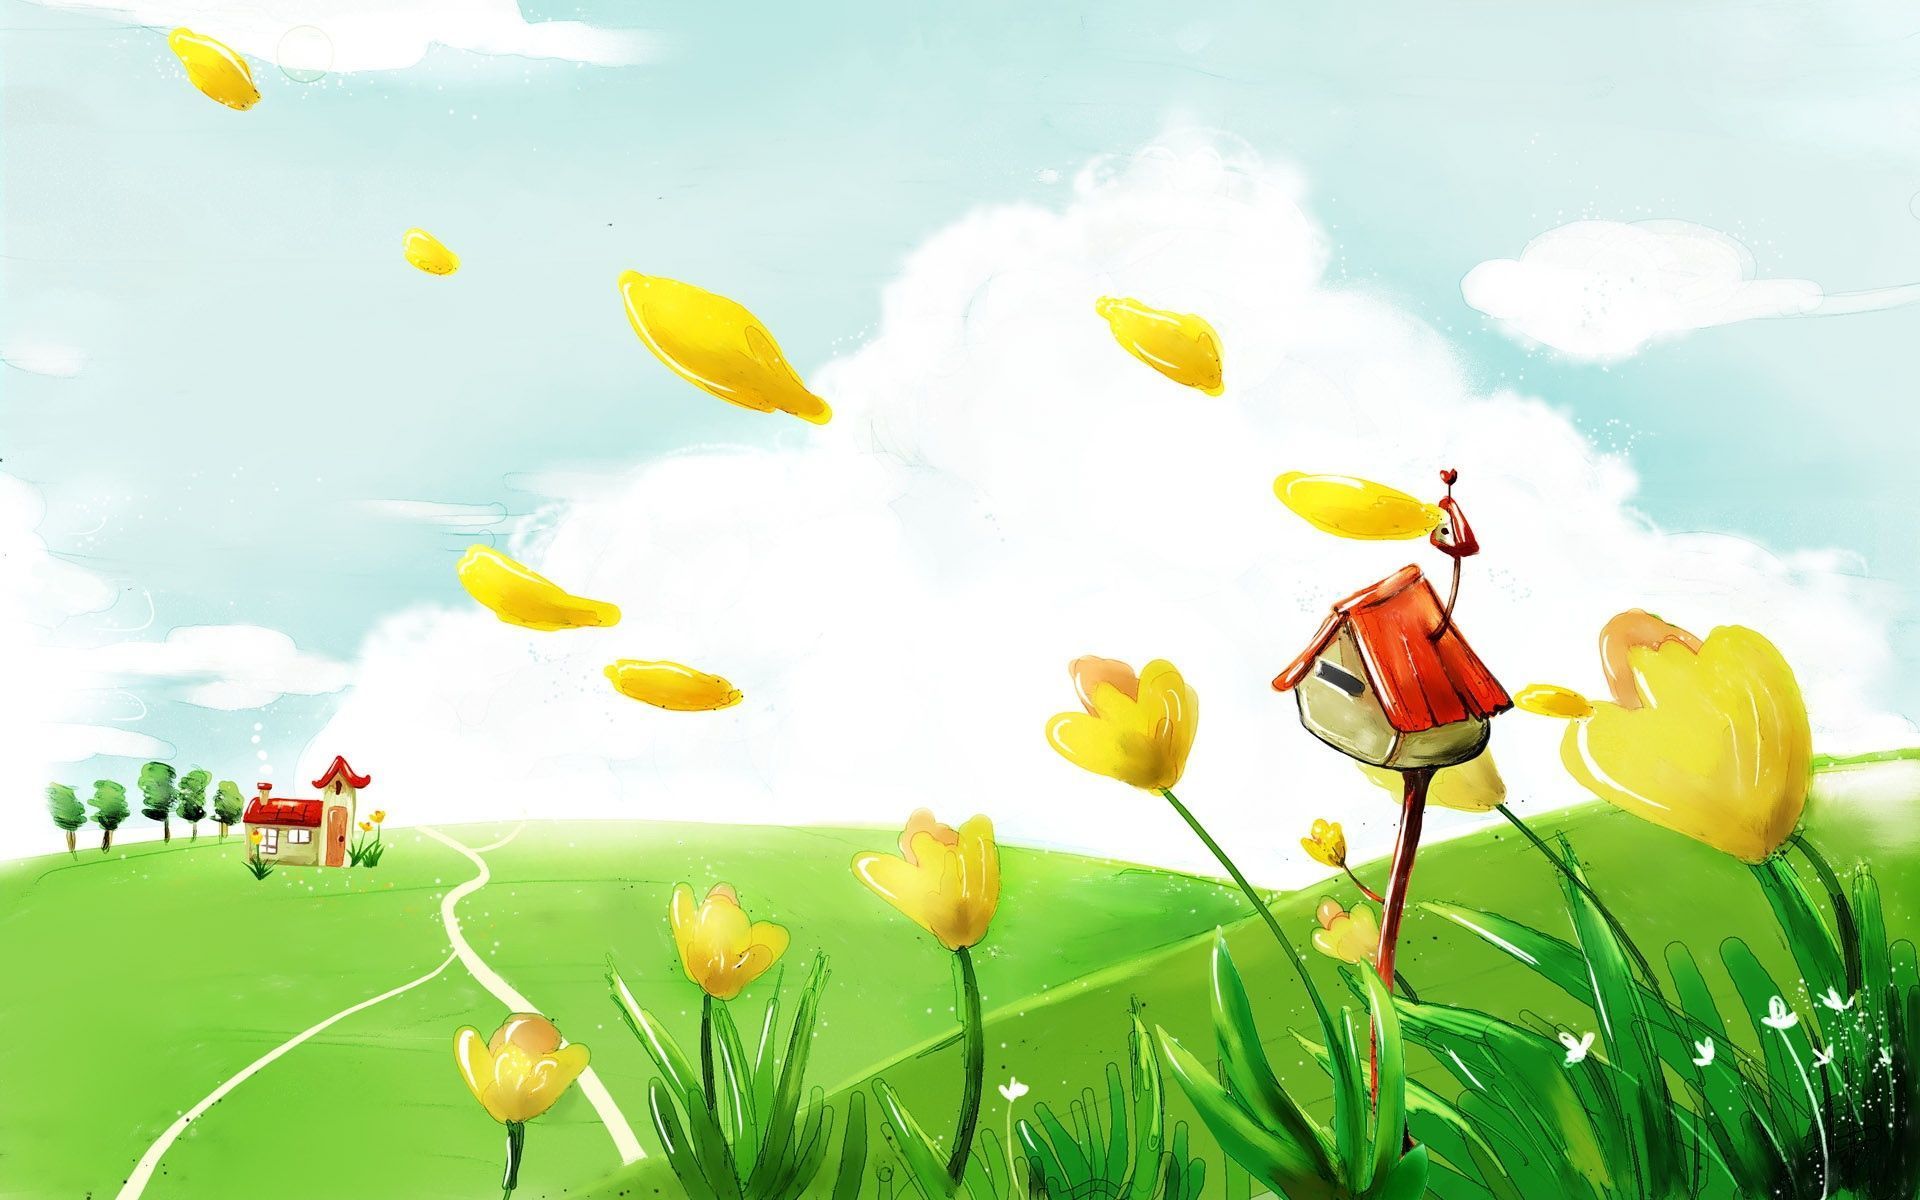 sweet home for kids play photo in 1080p desktop background ...